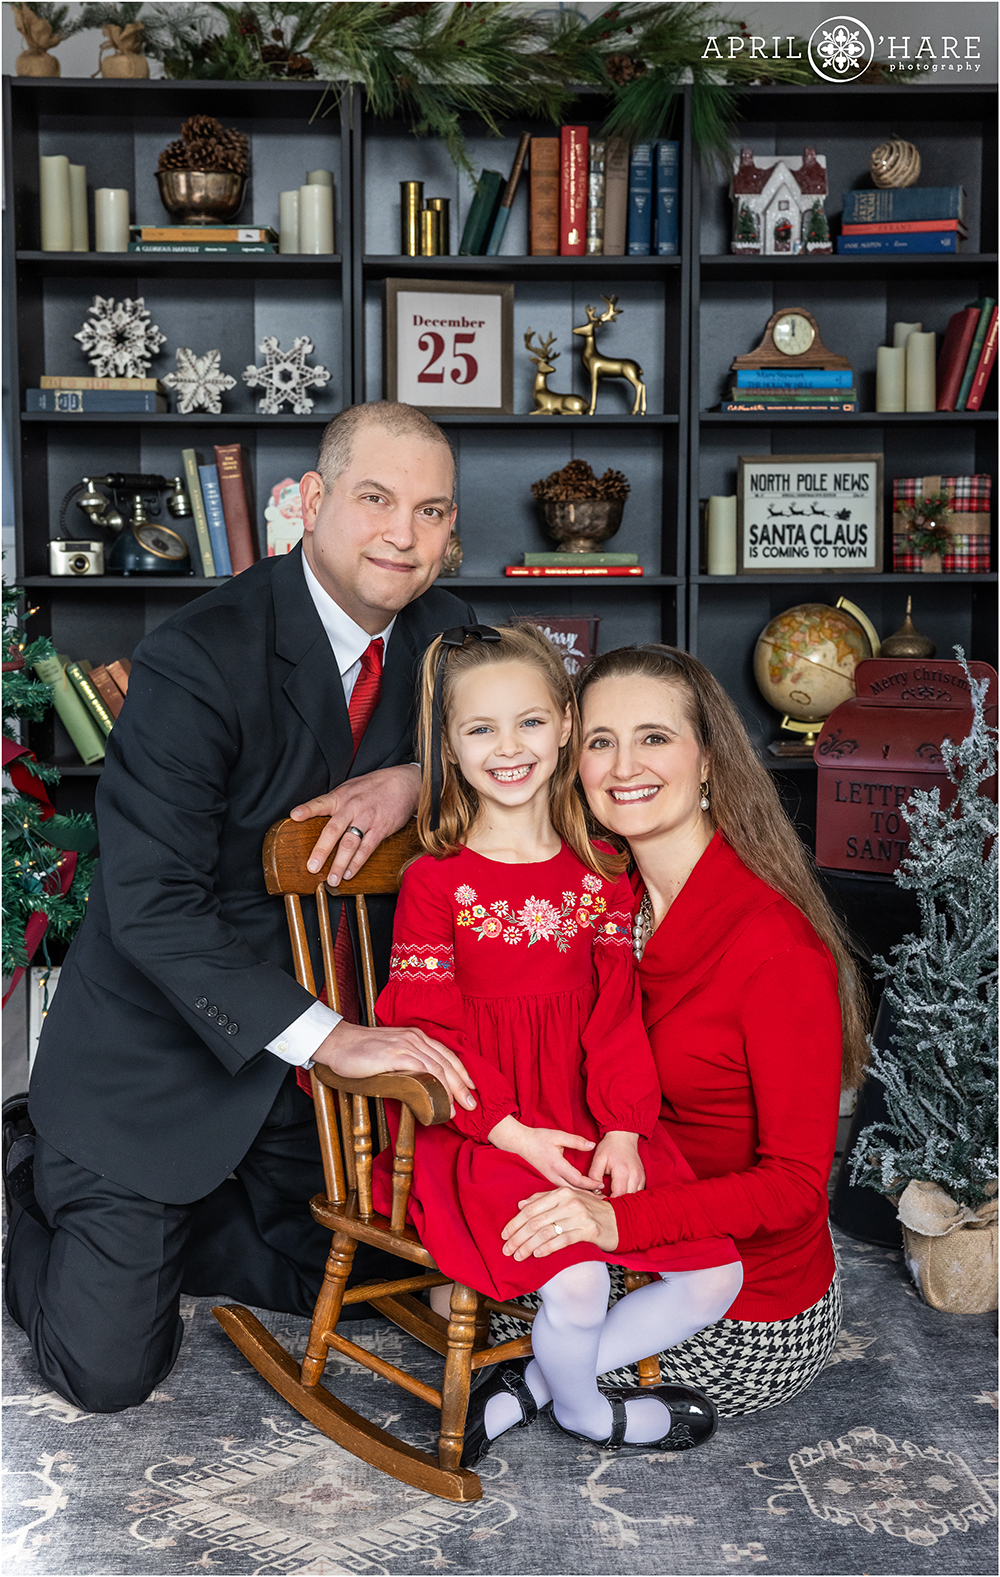 A cute family of 3 pose in a Christmas library setting inside a studio in Denver Colorado